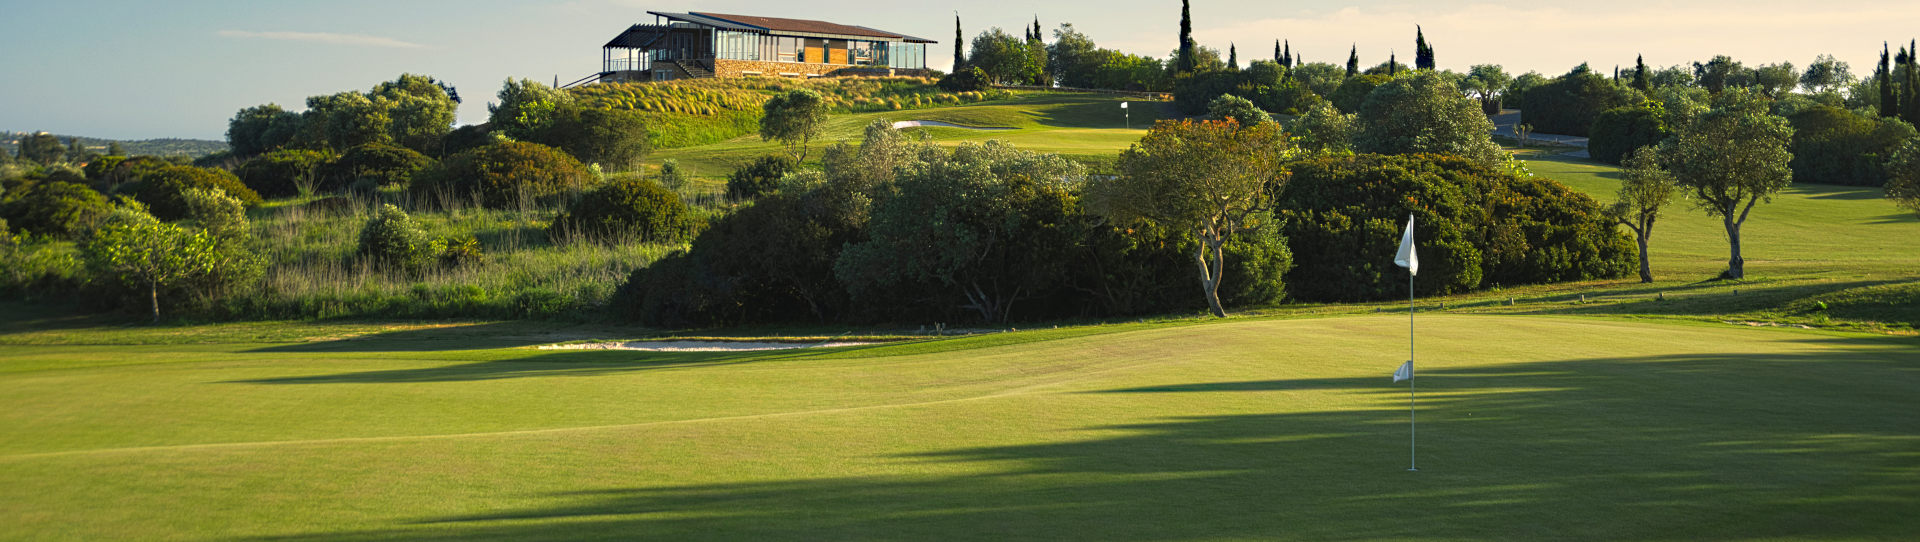 Portugal golf holidays - Espiche Duo Experience - Photo 1